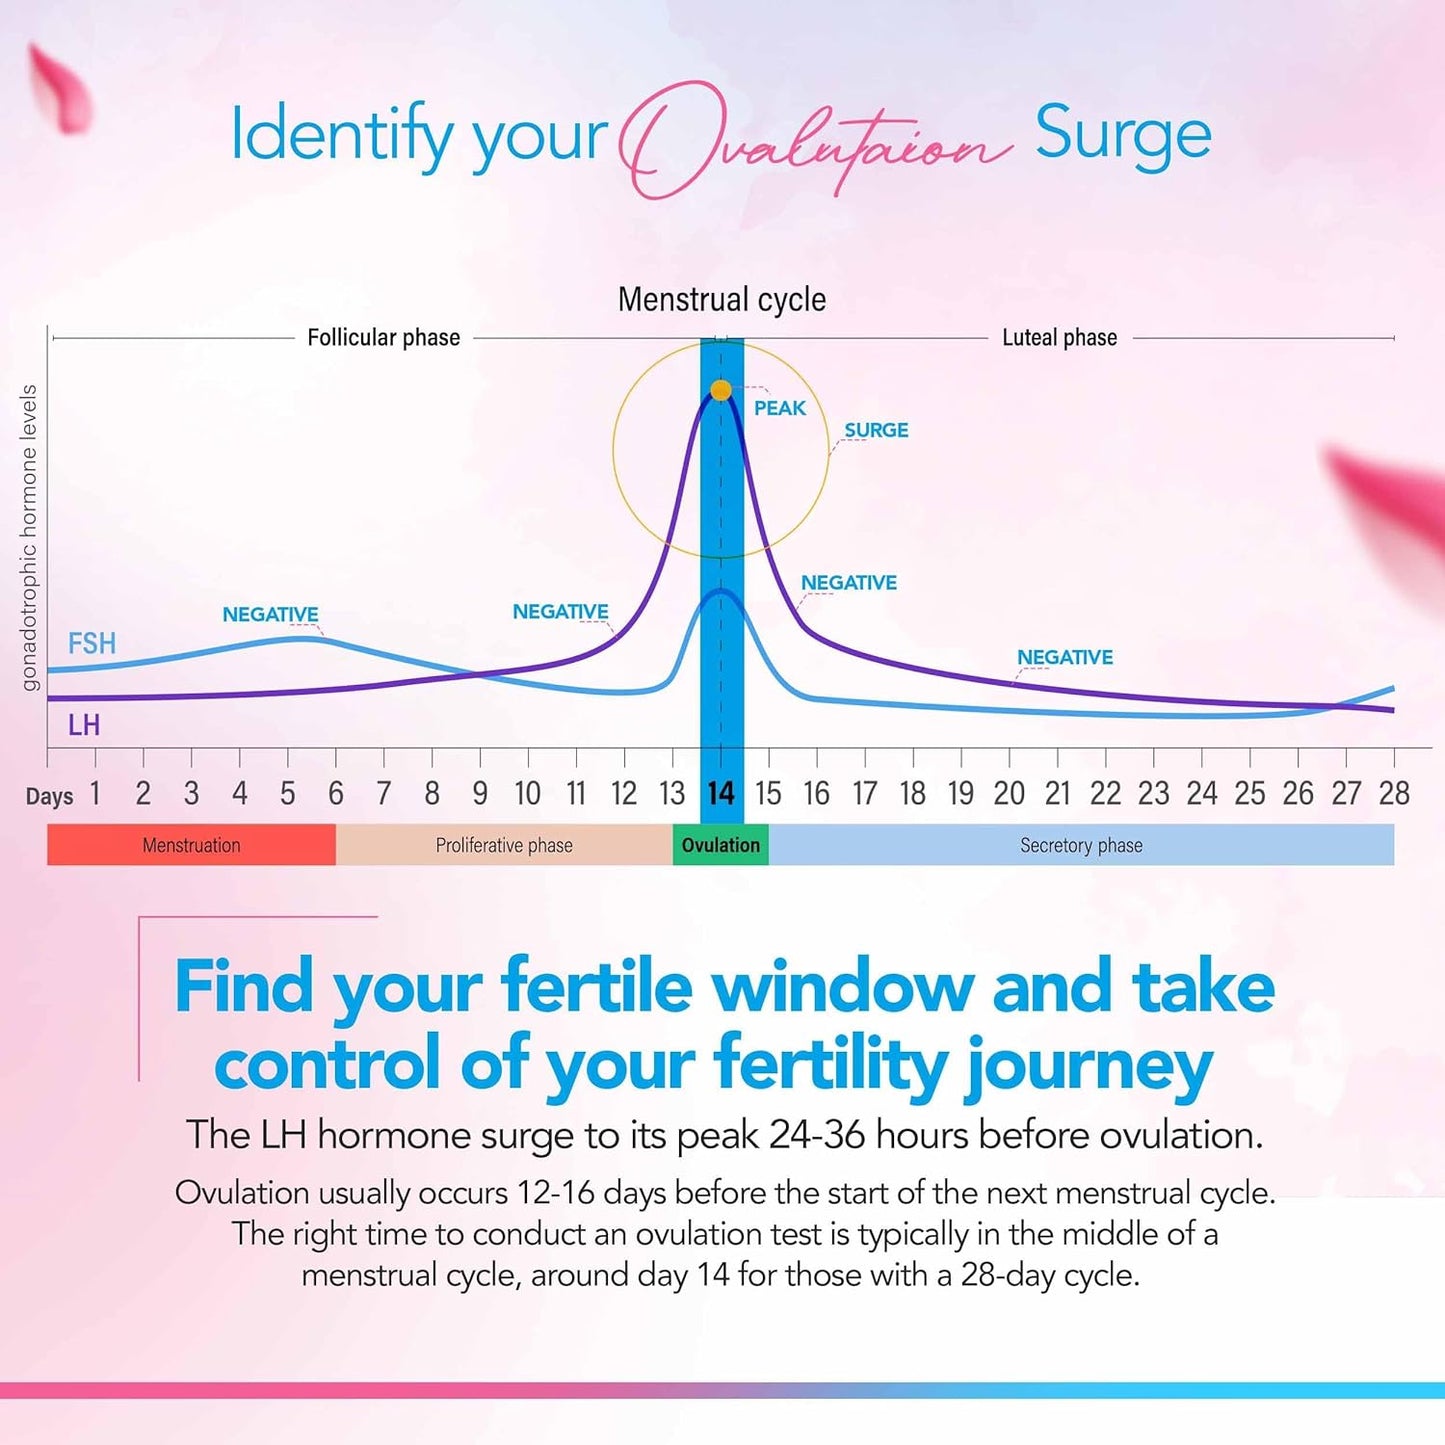 Clinical Guard Urine Ovulation Test Strips LH Image 3 - How to Identify Your Ovulation Surge